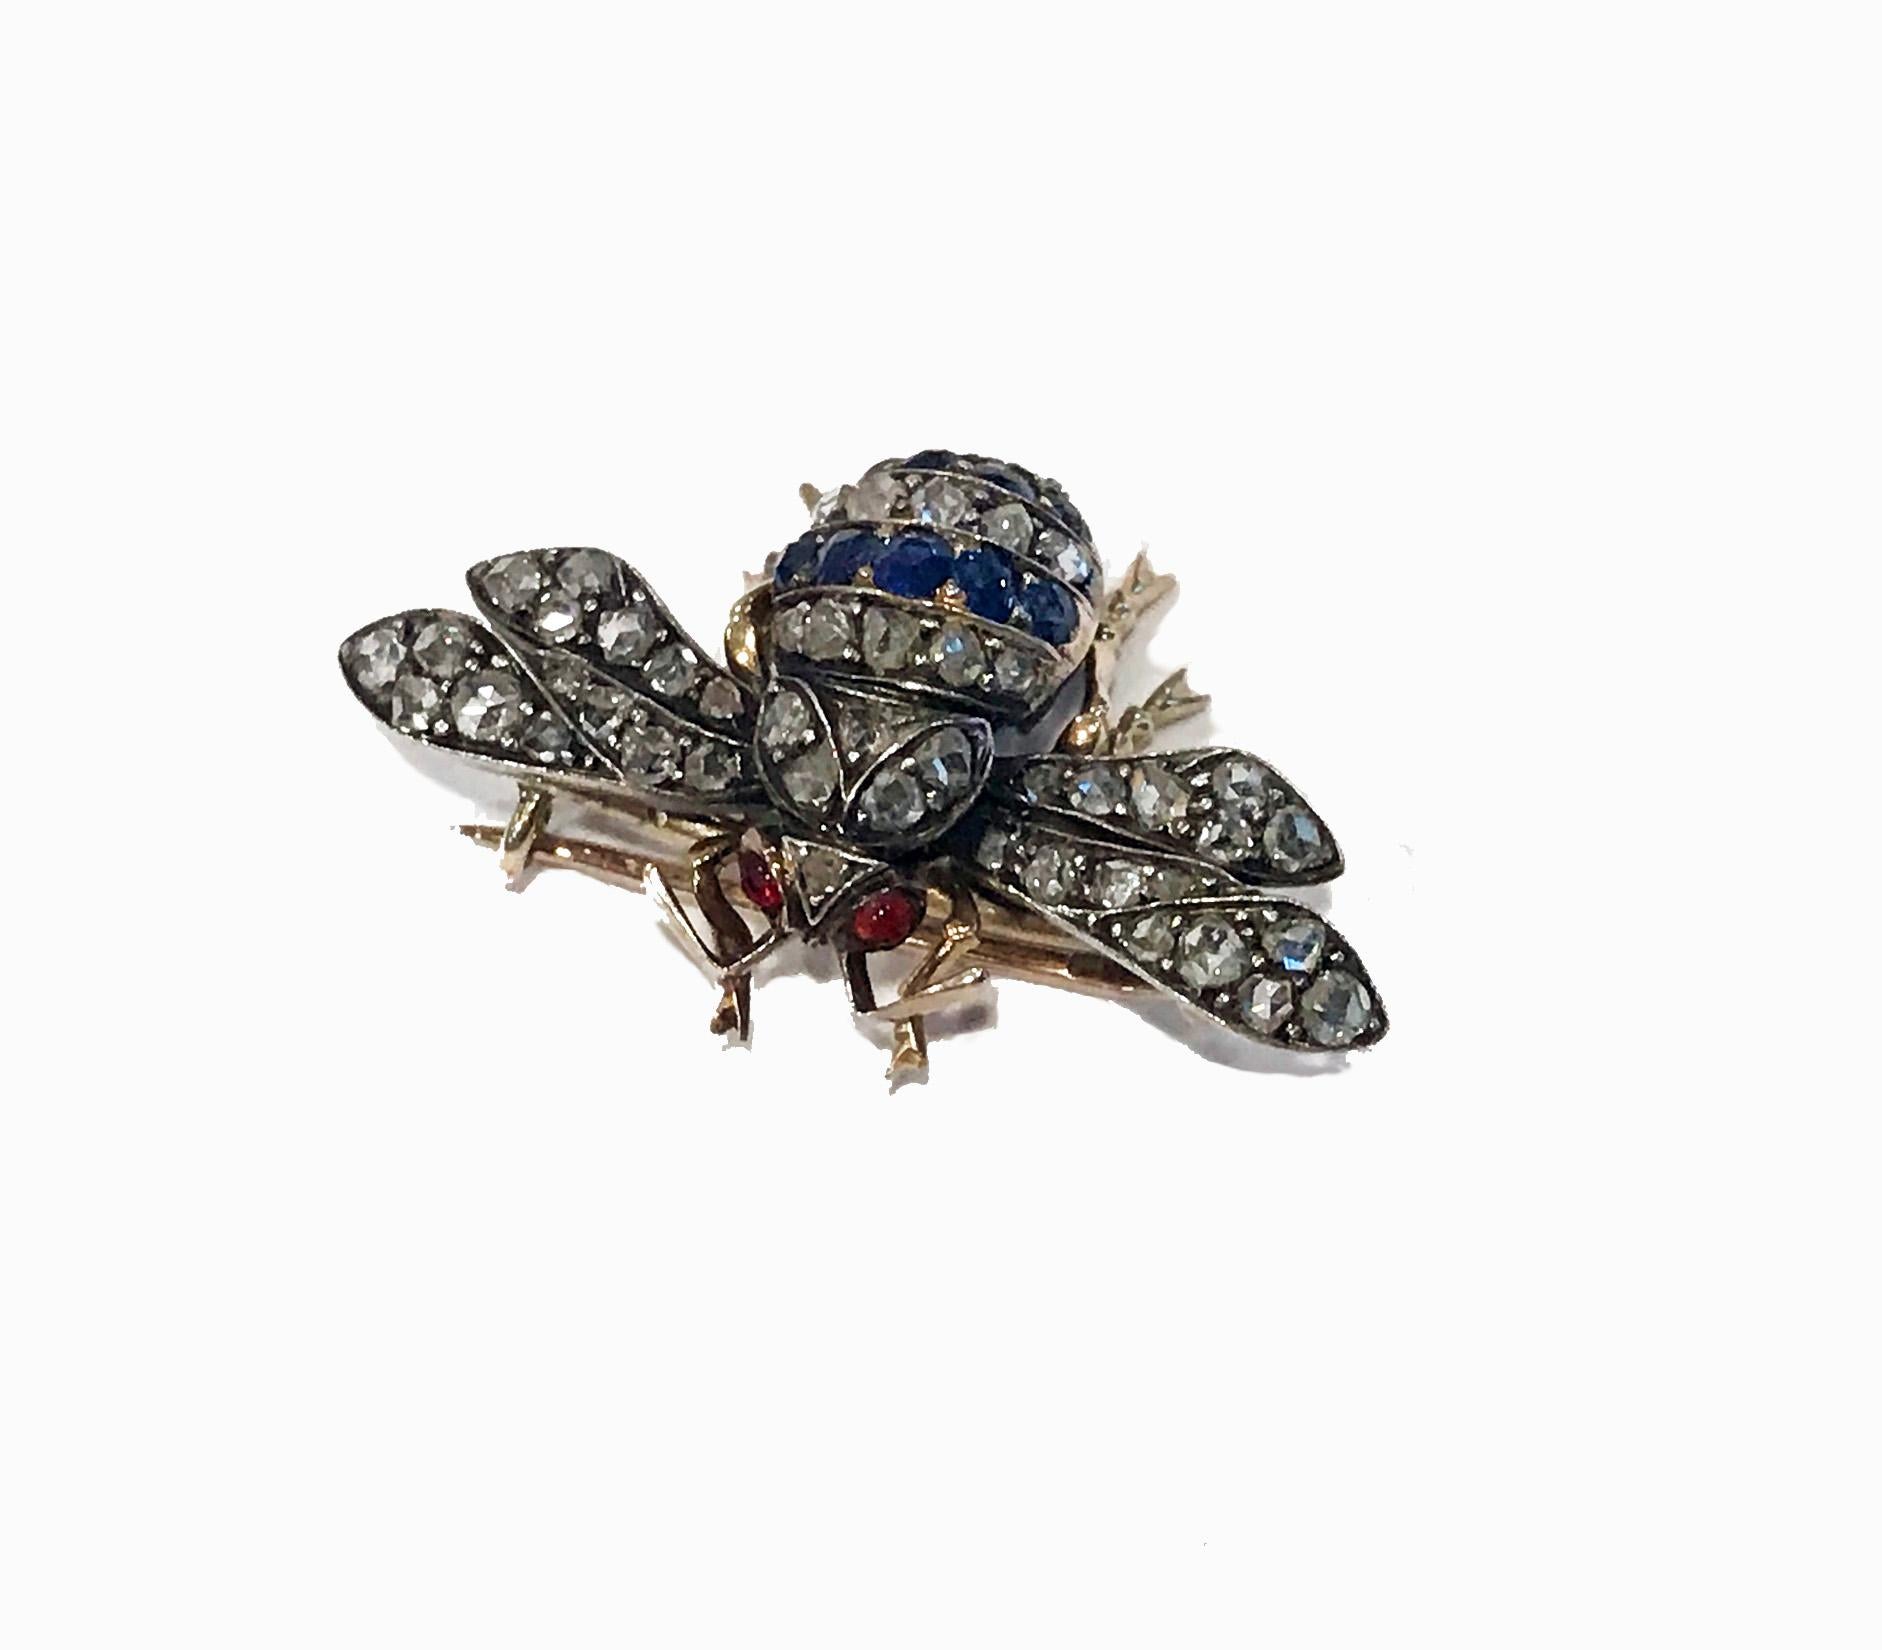 Antique Sapphire Diamond Ruby Bee Brooch, set with 49 old rose cut diamonds, 9 old cut sapphires, with cabochon rubies for the eyes, mounted Gold and cut down silver. English, circa 1880, detachable safety chain. Wing Spread: 1.50 inches. Item